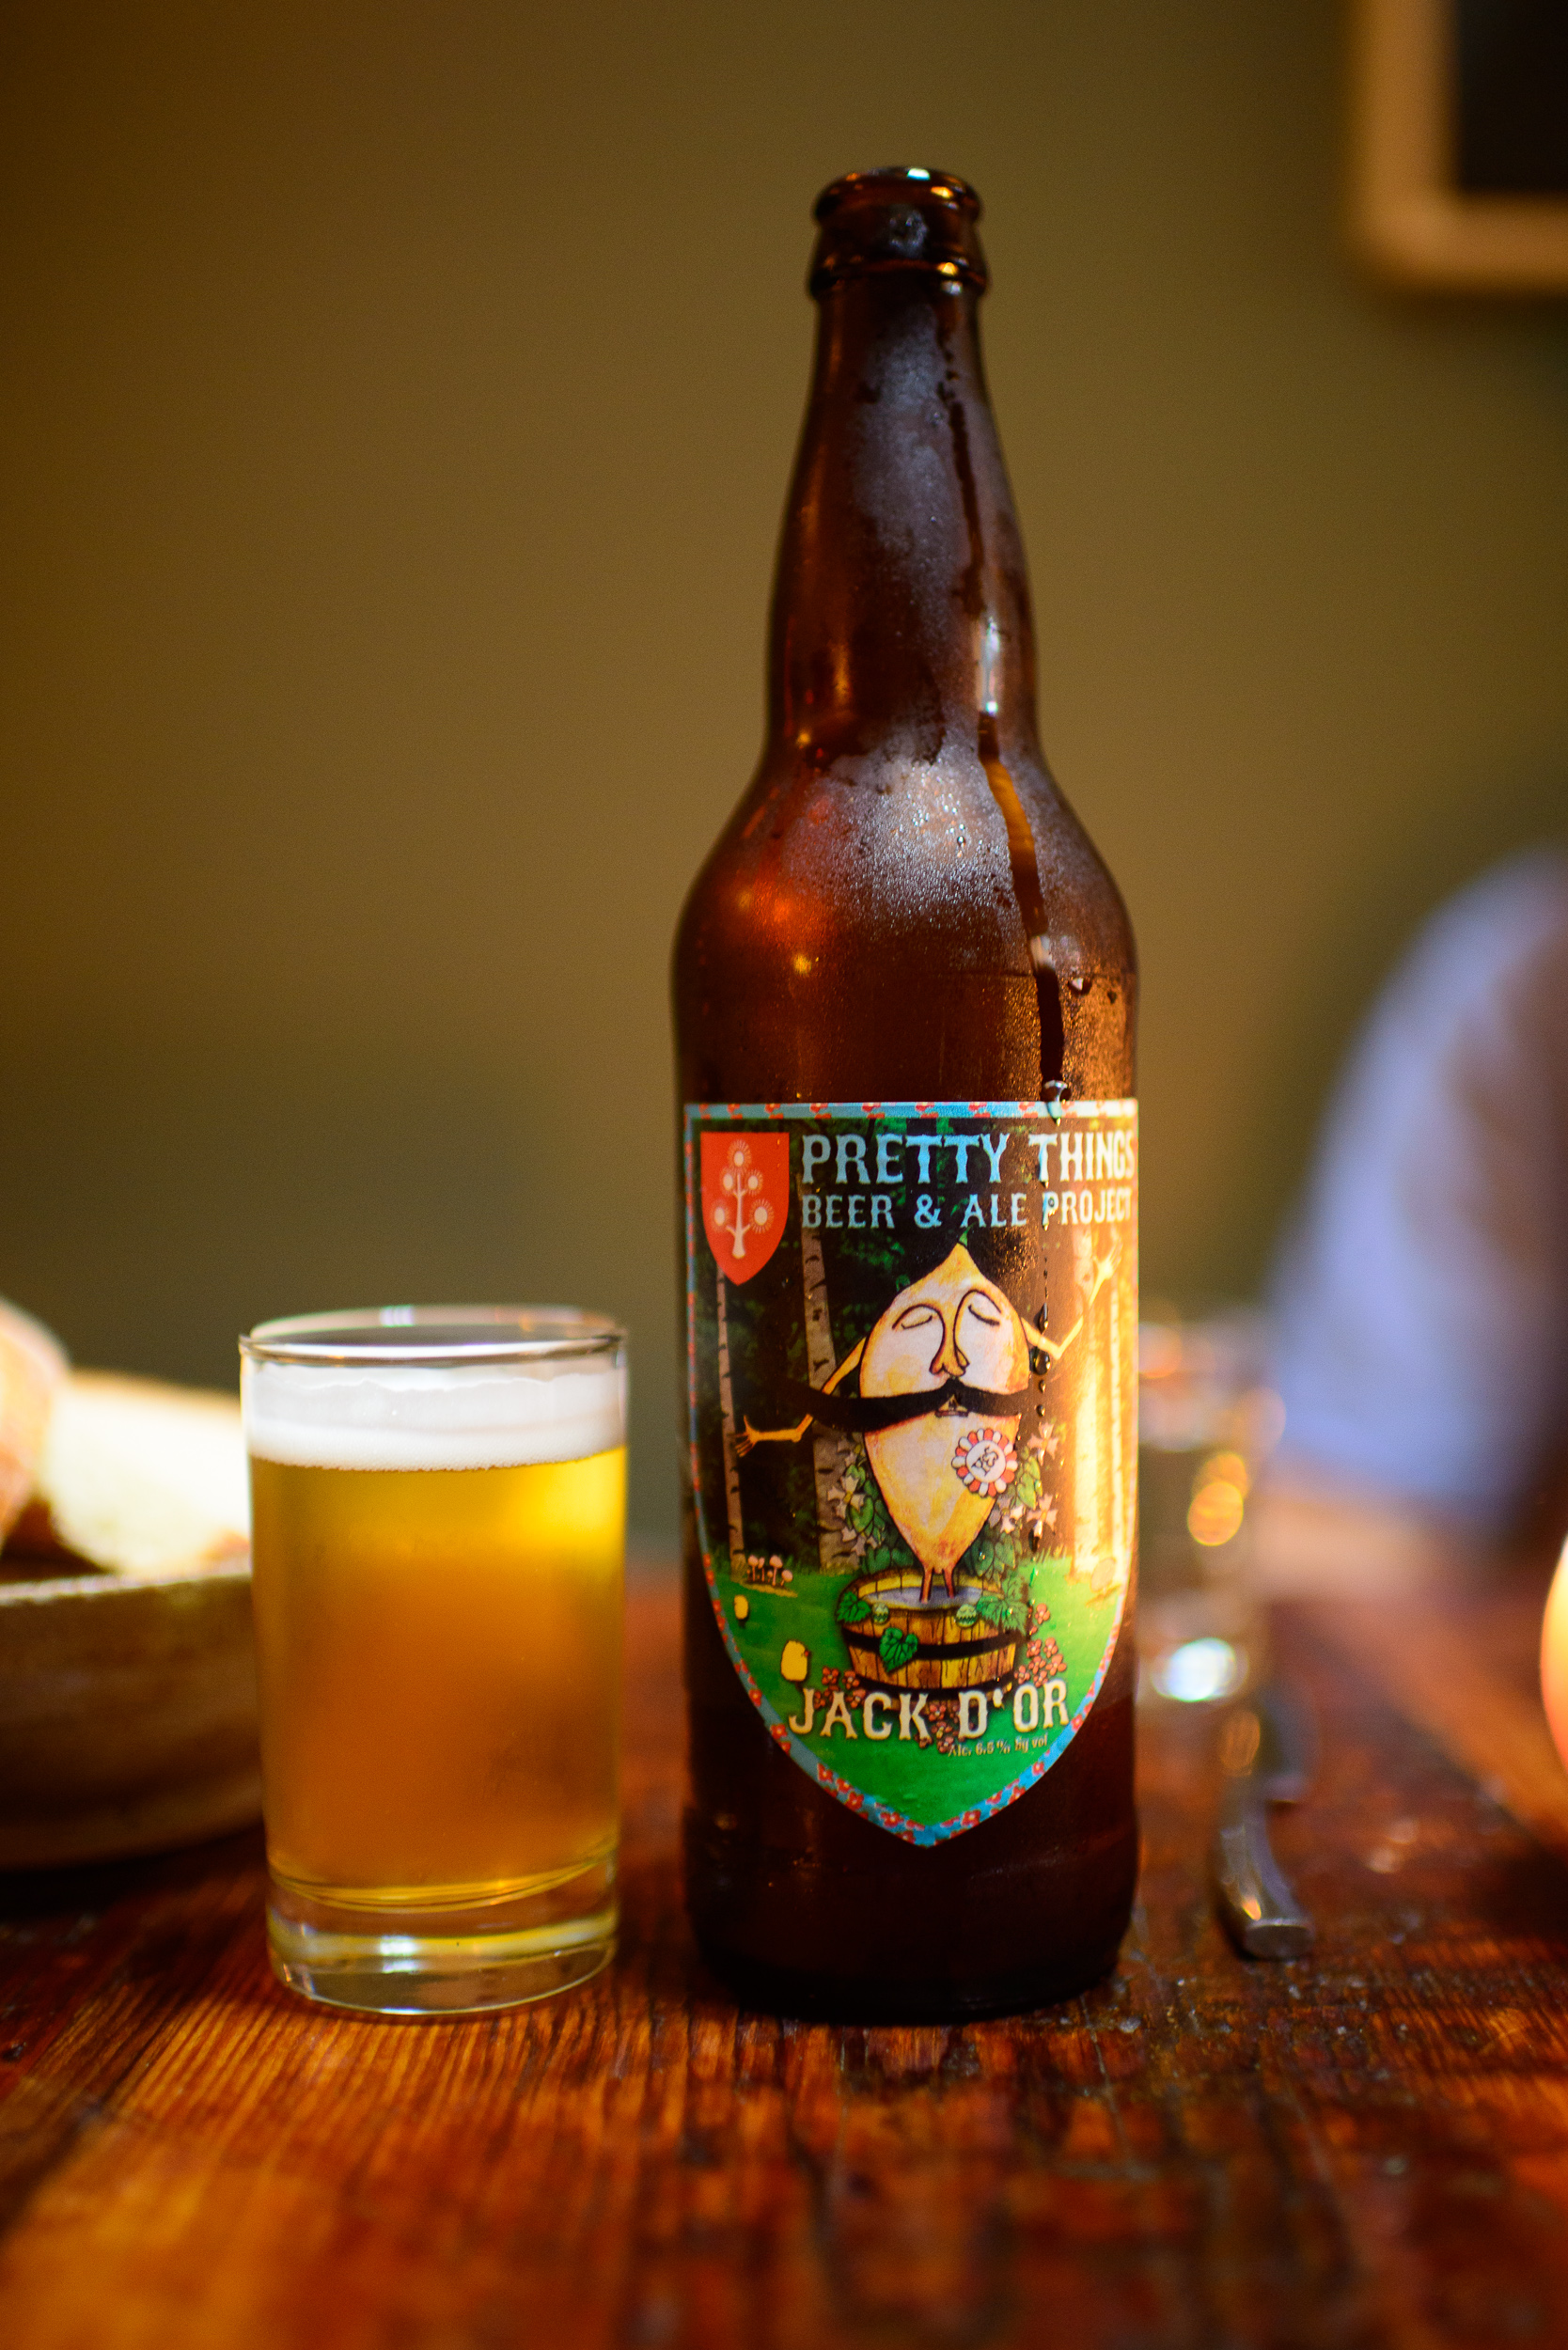 Pretty Things Ale Jack D'Or